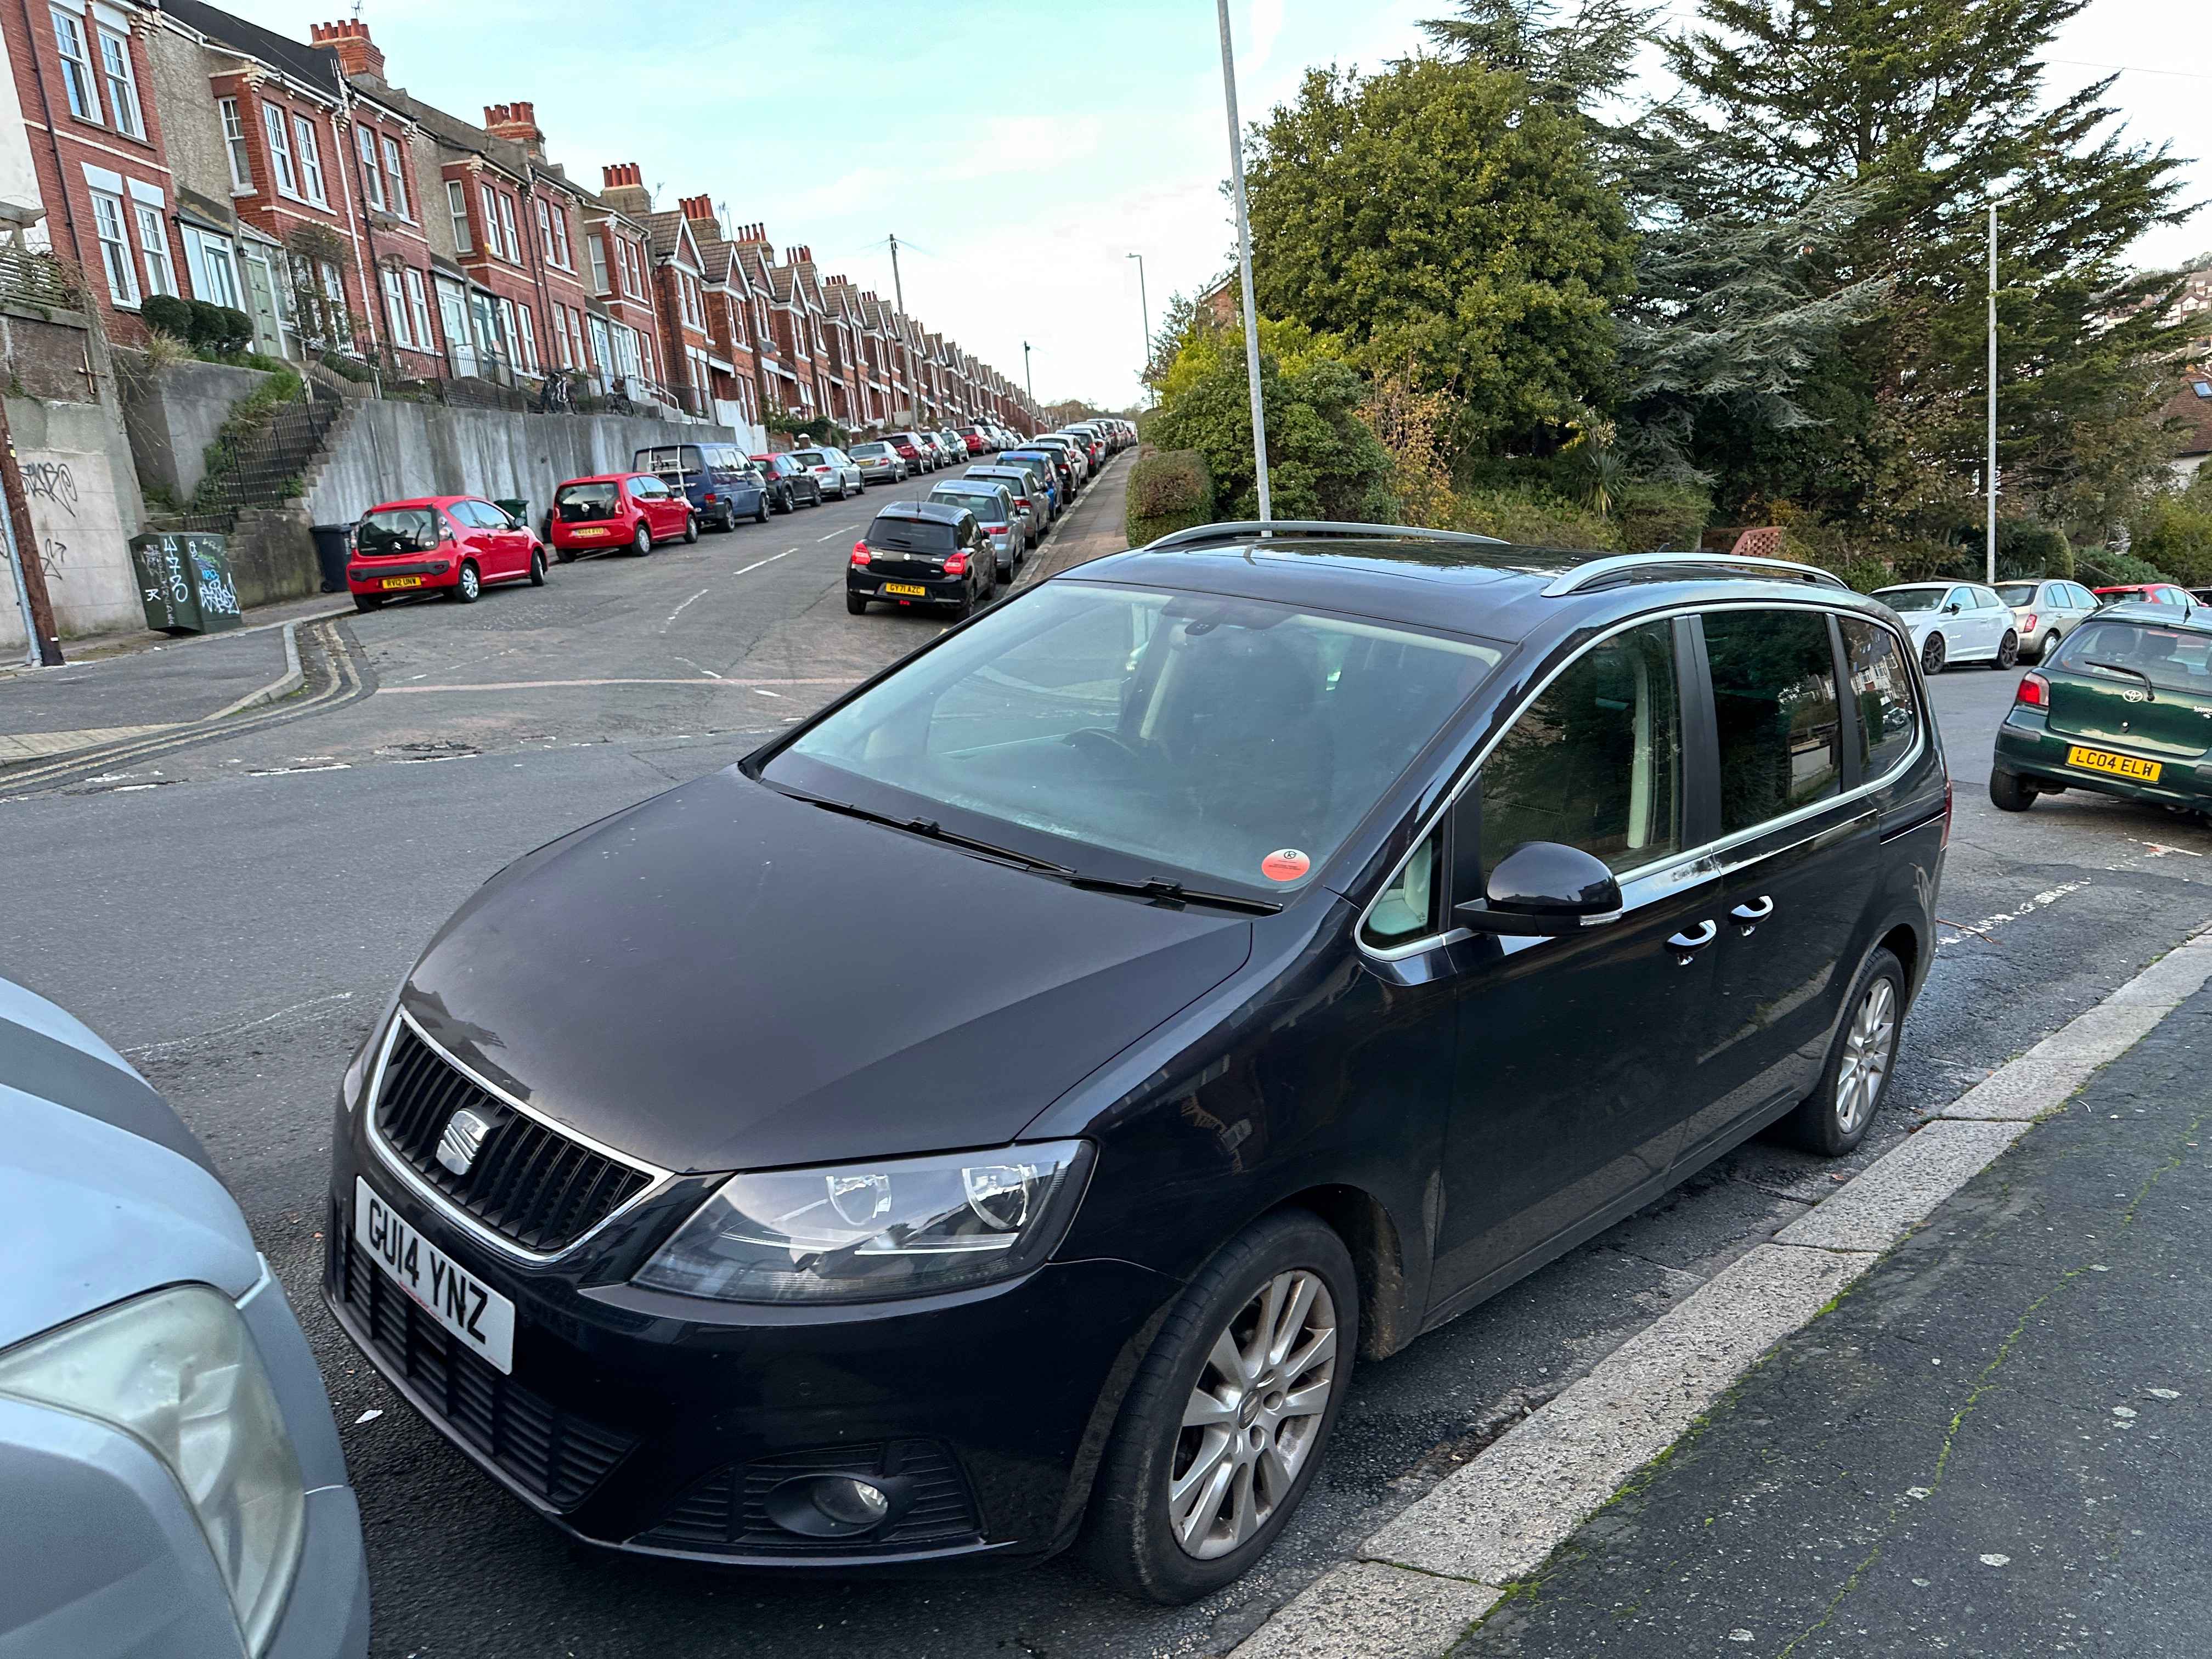 Photograph of GU14 YNZ - a black Seat Alhambra parked in Hollingdean by a non-resident. The second of two photographs supplied by the residents of Hollingdean.